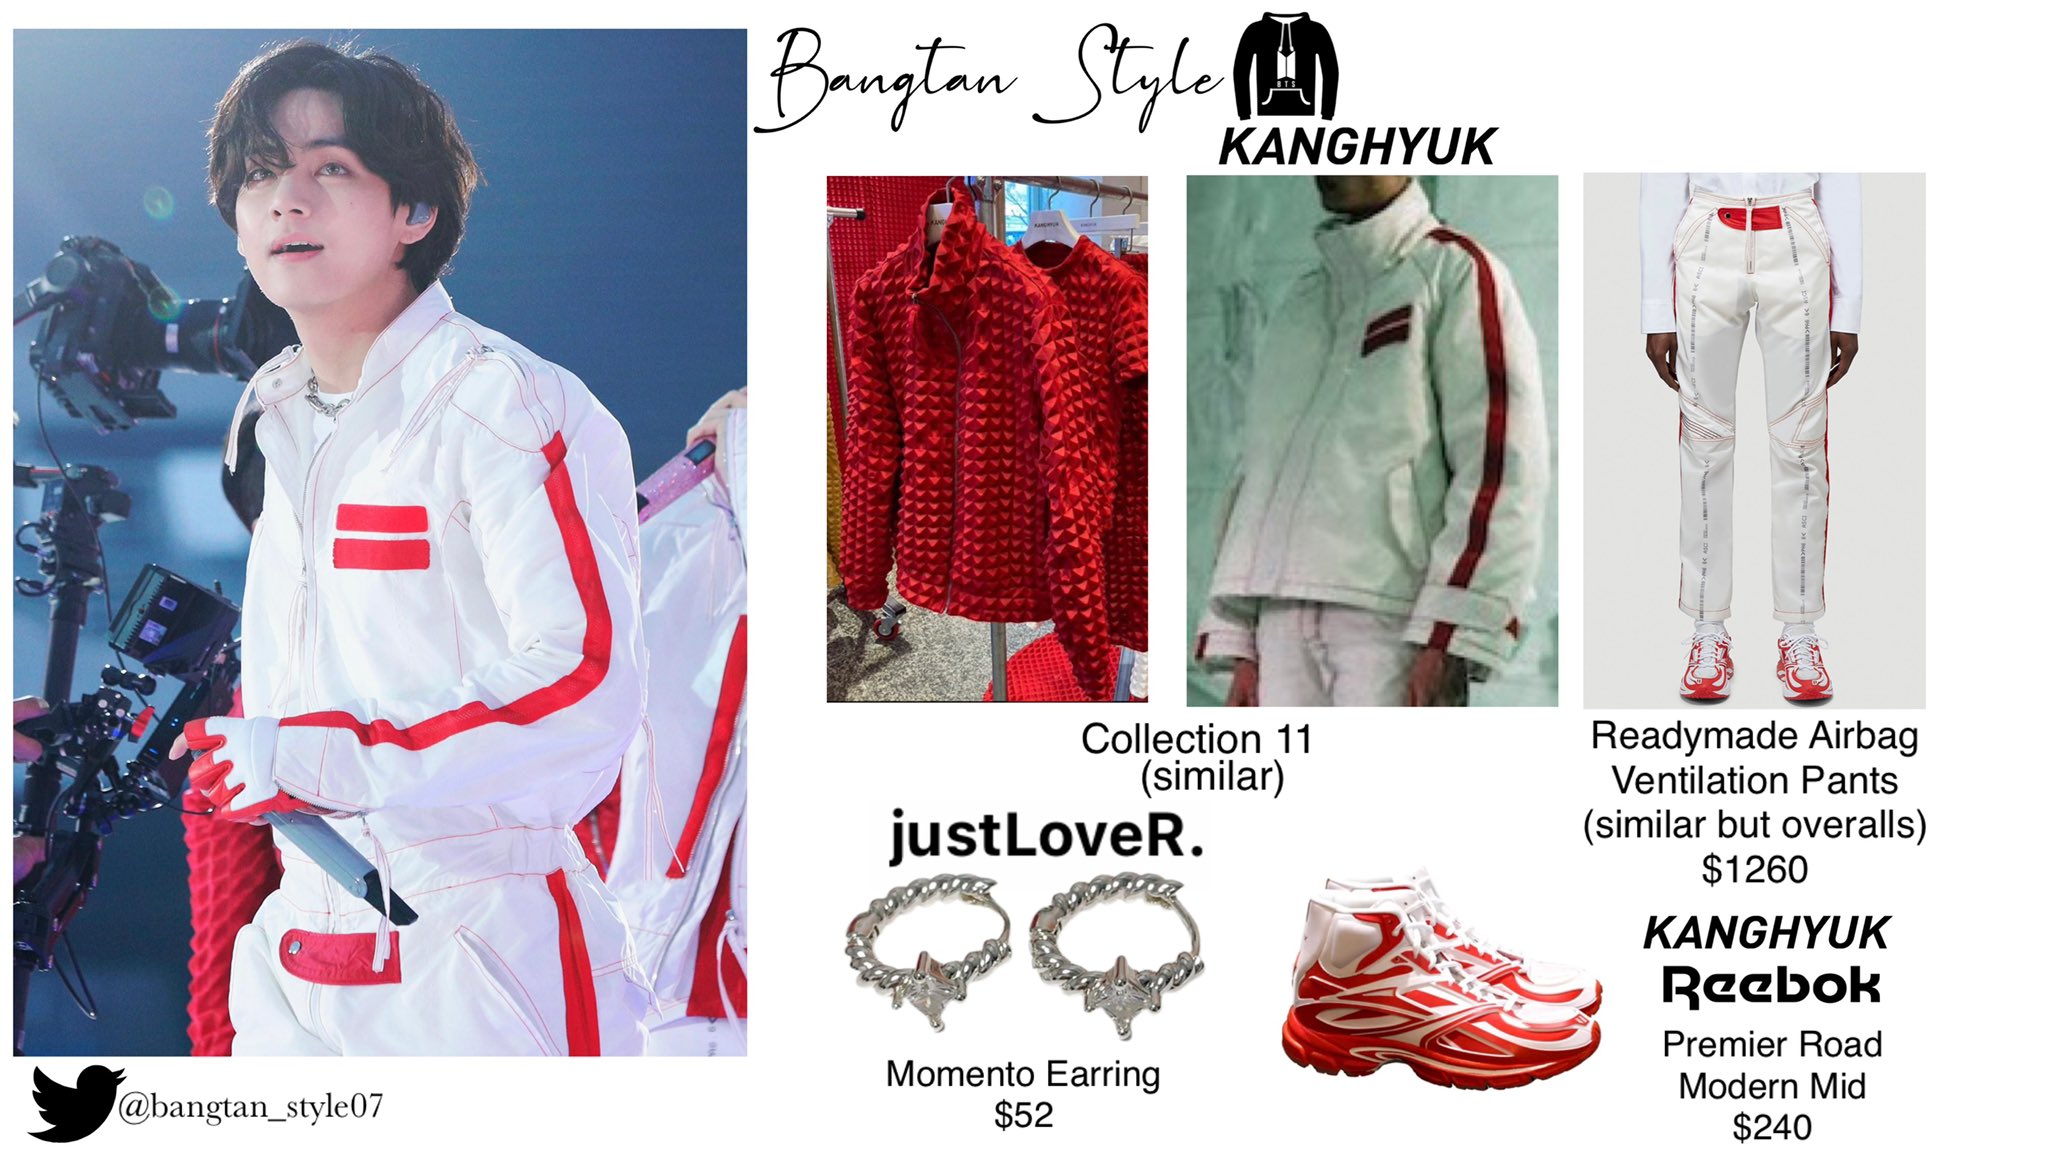 Bangtan Style⁷ on Twitter  Bts inspired outfits, Fashion branding, Cool  outfits